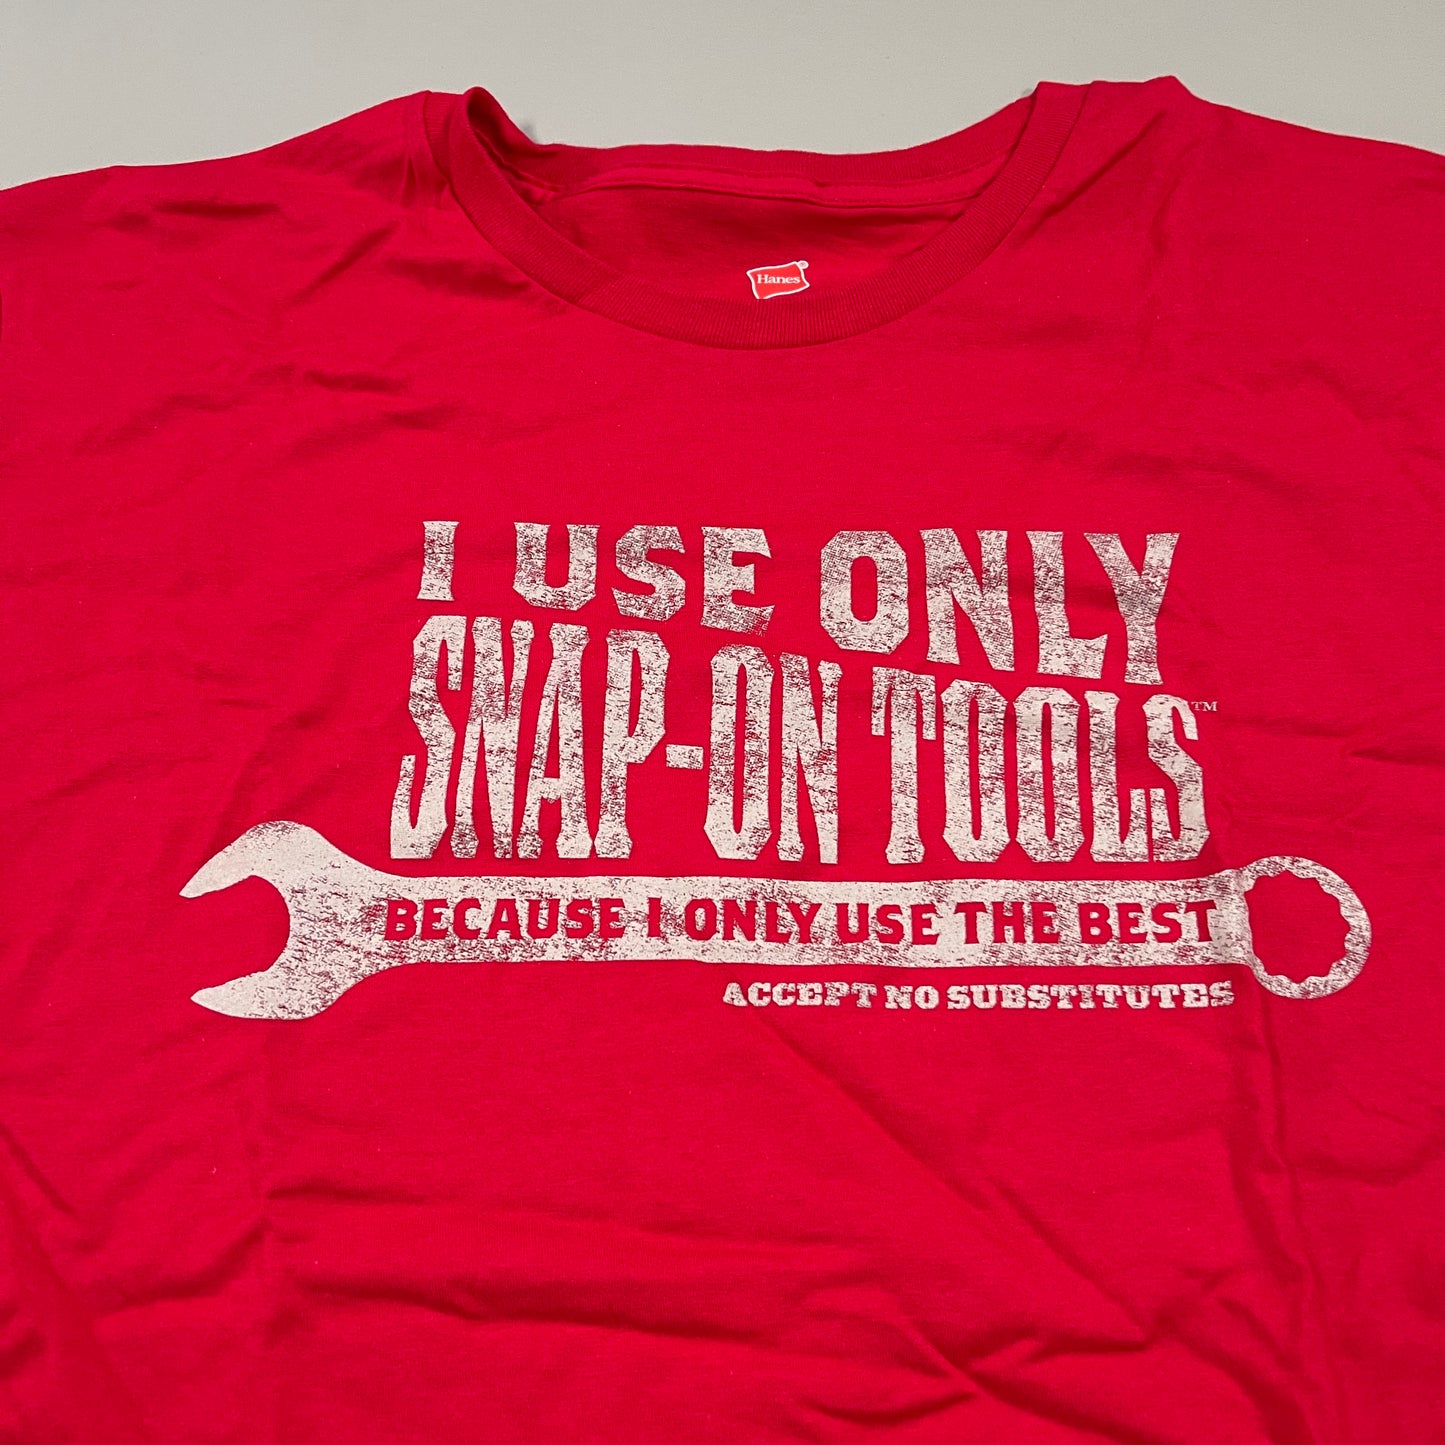 SNAP ON Because I Only Use The Best Tee Shirt Men's Sz XL Red (New Other)